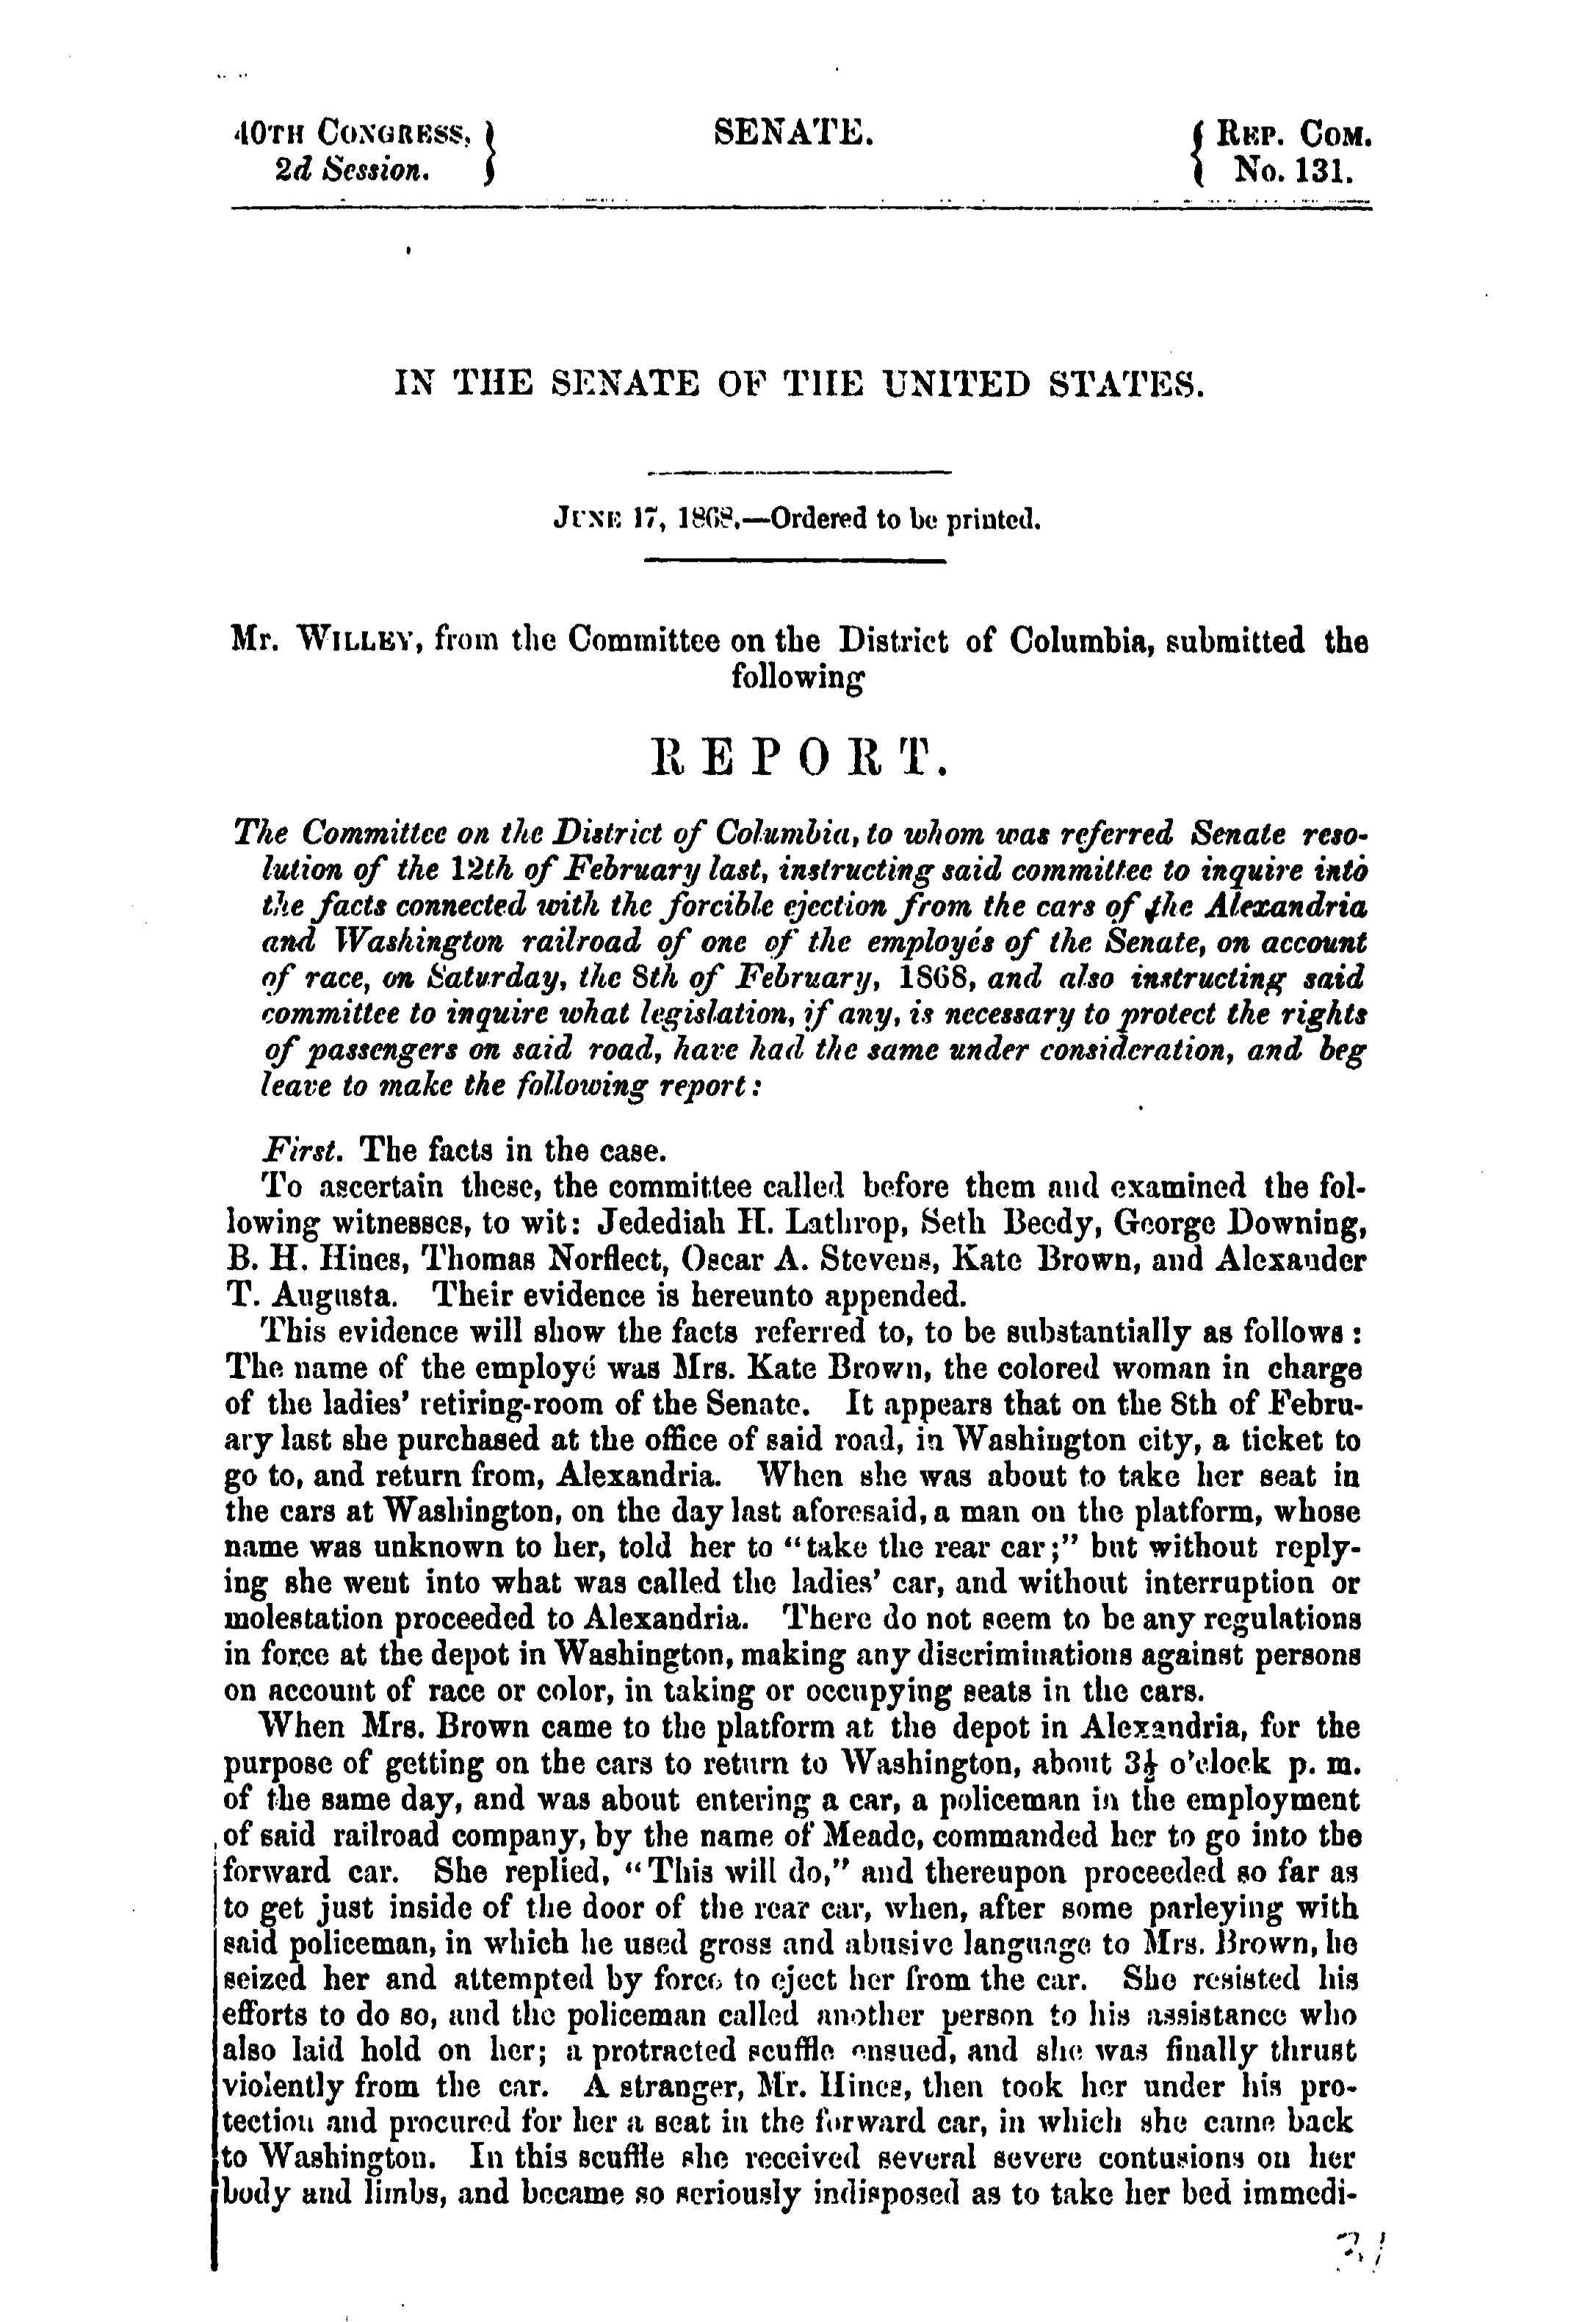 The first page of the Senate report from Mr. Willev. The report is typed and fills the whole page with a few paragraphs.